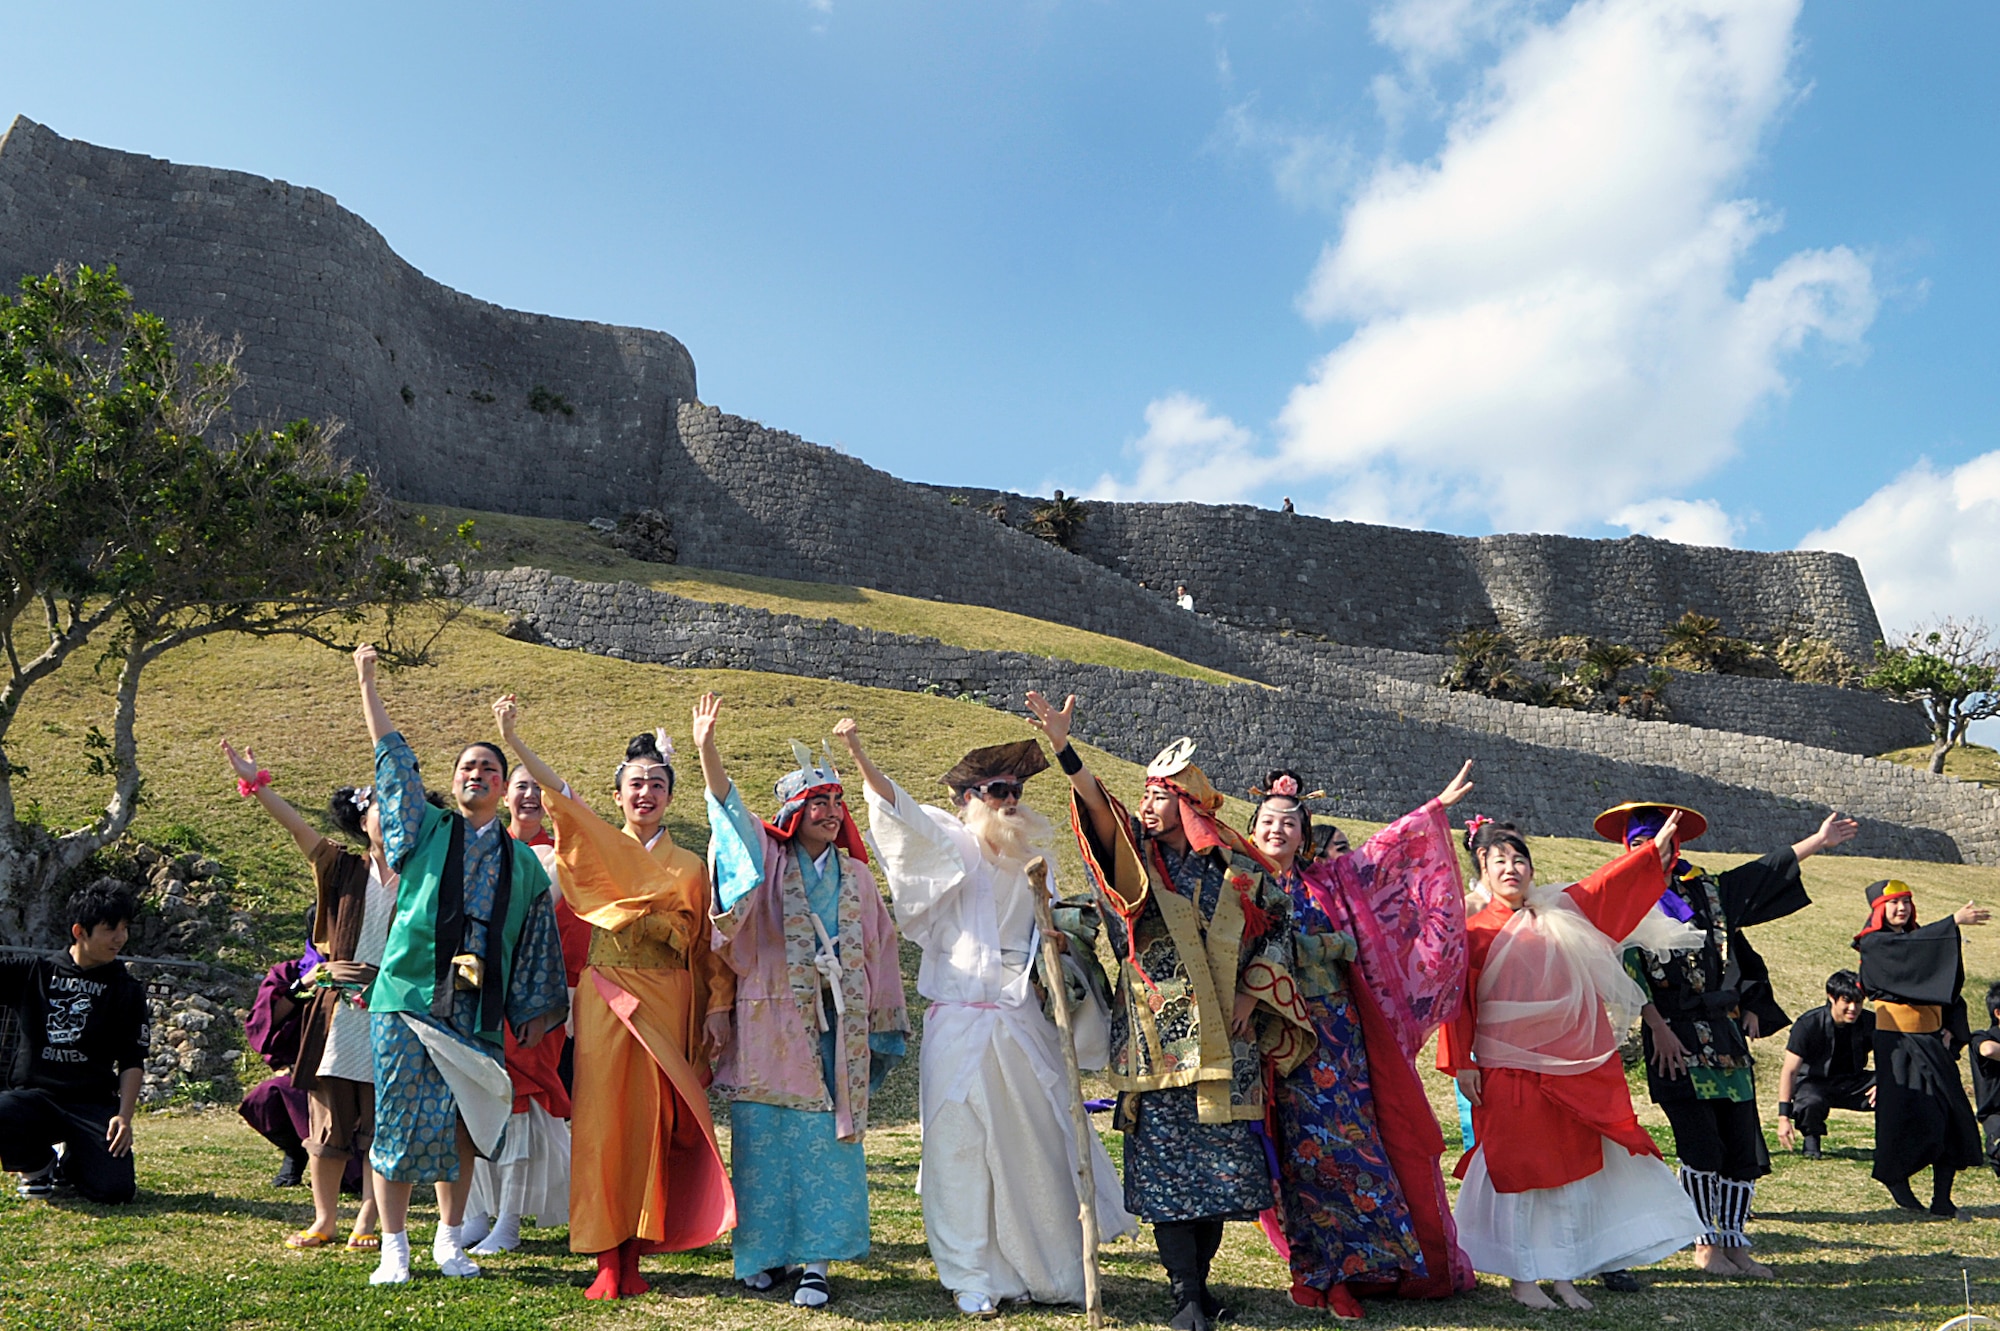 A group of local youth poses for photos in front of the Katsuren Castle ruins on Okinawa, Japan, on Jan. 25, 2015. The group dressed in period costume to perform dances and sing songs in honor of Lord Katsuren, the first lord of the castle in the 13th century. (U.S. Air Force photo by Tim Flack)